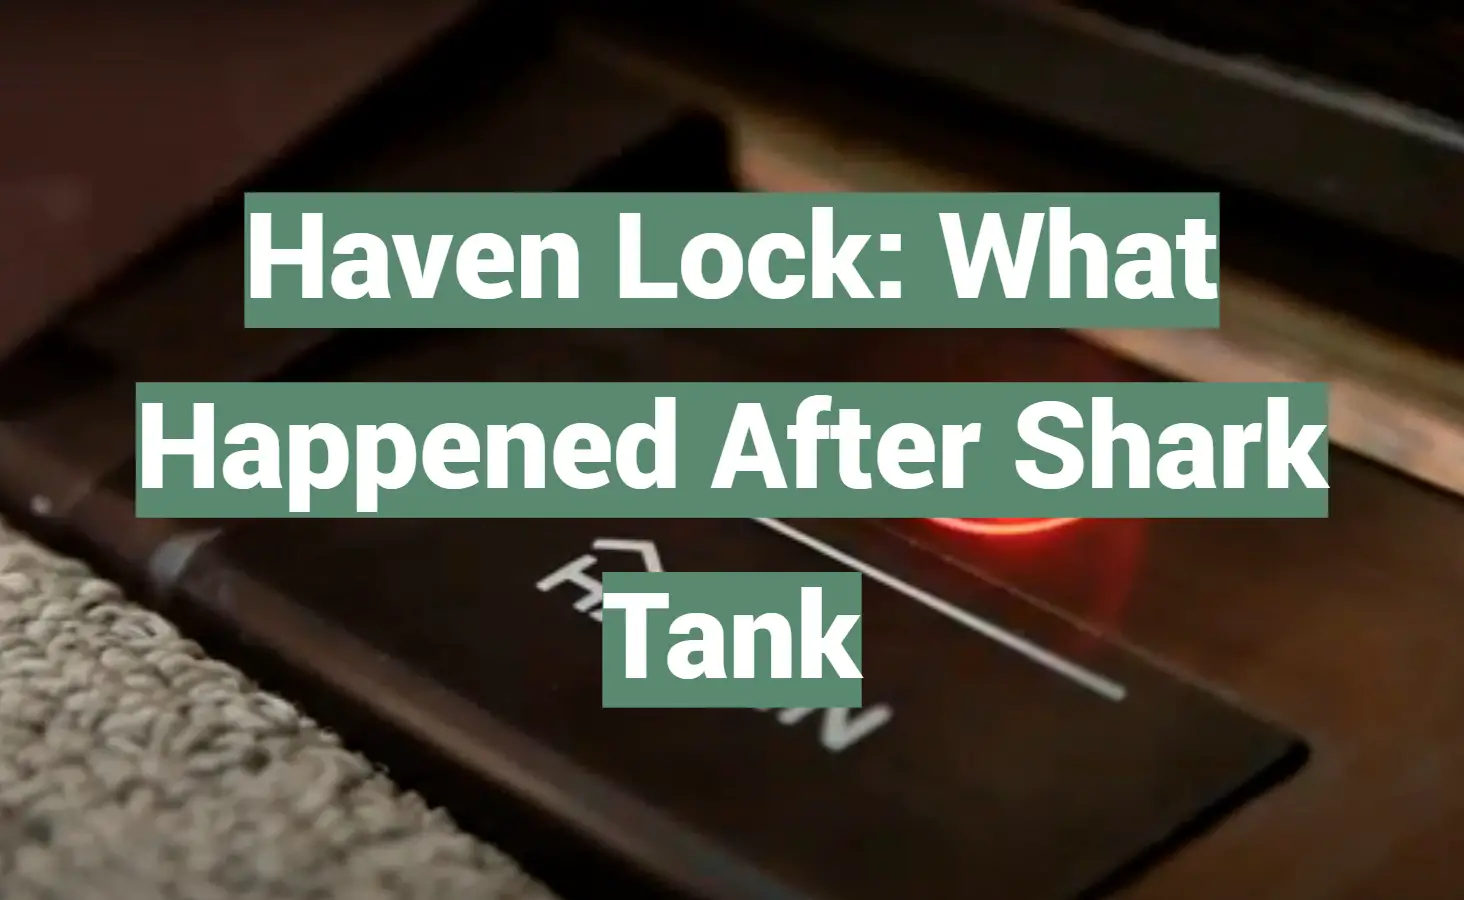 Haven Lock: What Happened After Shark Tank